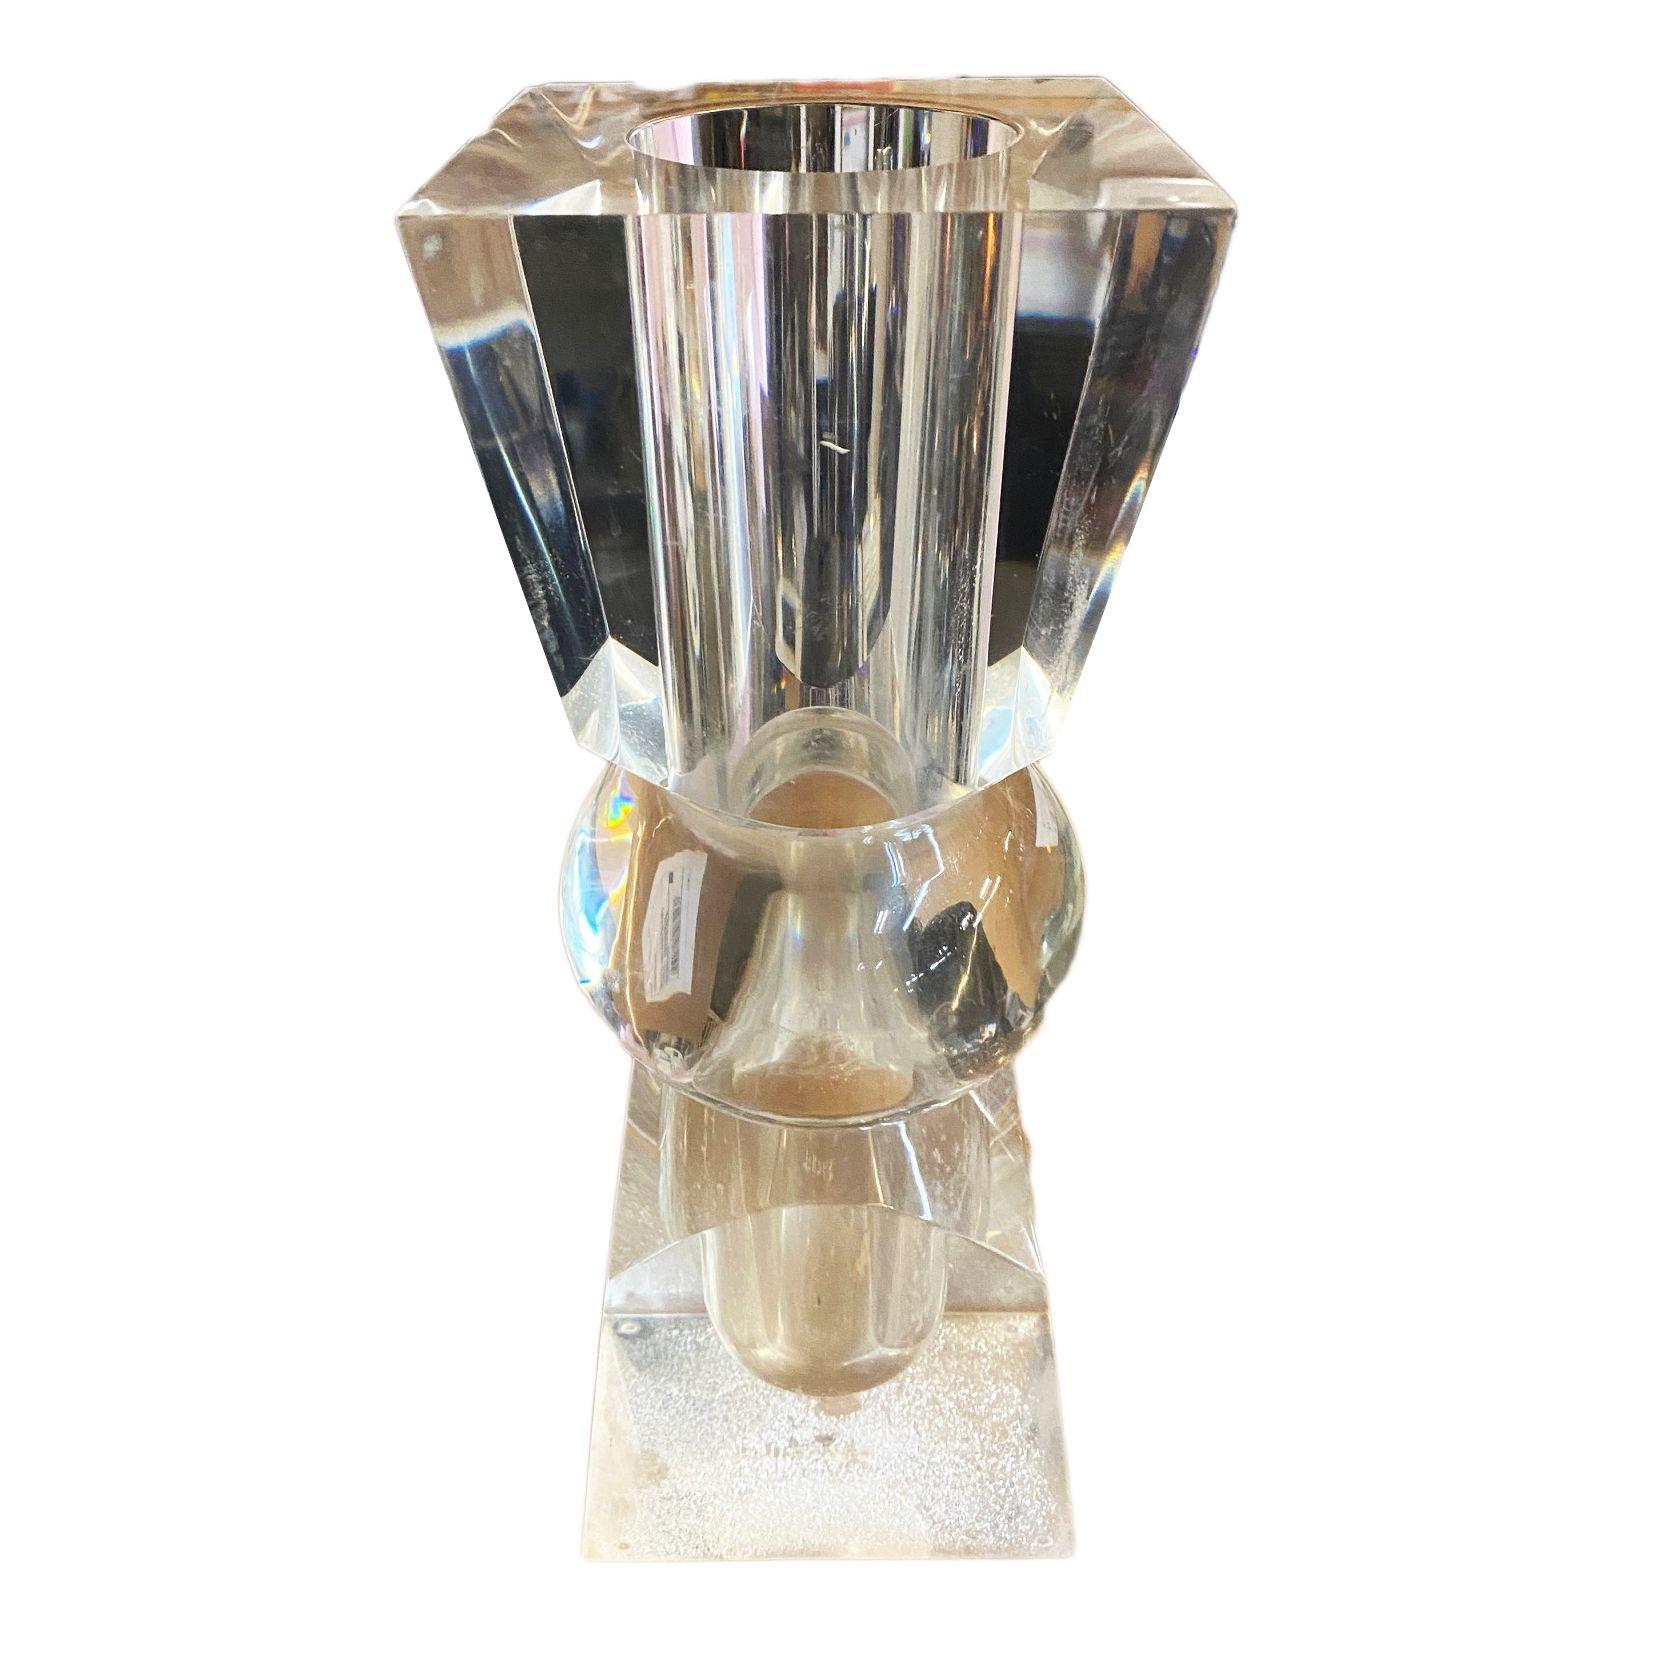 Introducing a masterpiece for your space – the Large Hand Sculpted Vase by Charles Hollis Jones, crafted from luxurious lucite. This exquisite piece showcases the renowned designer's artistry and flair. With its captivating form and meticulous